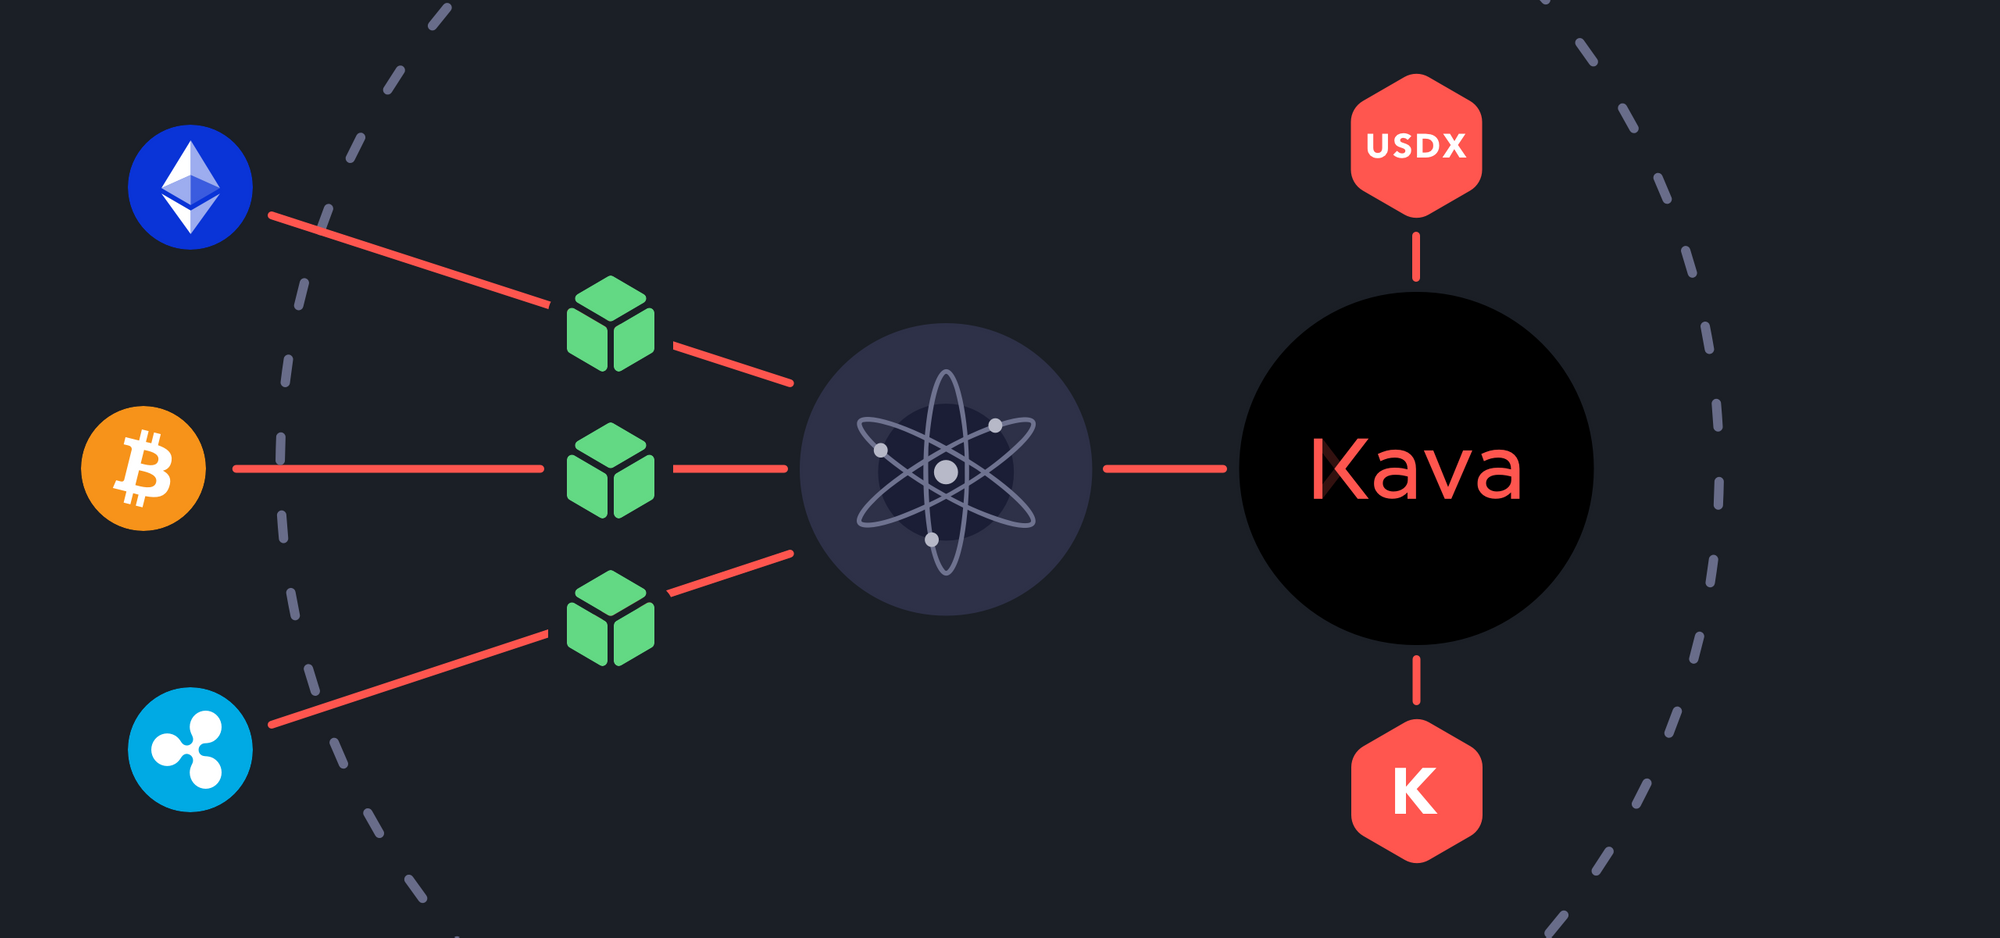 Kava - The first decentralized lending platform in Cosmos